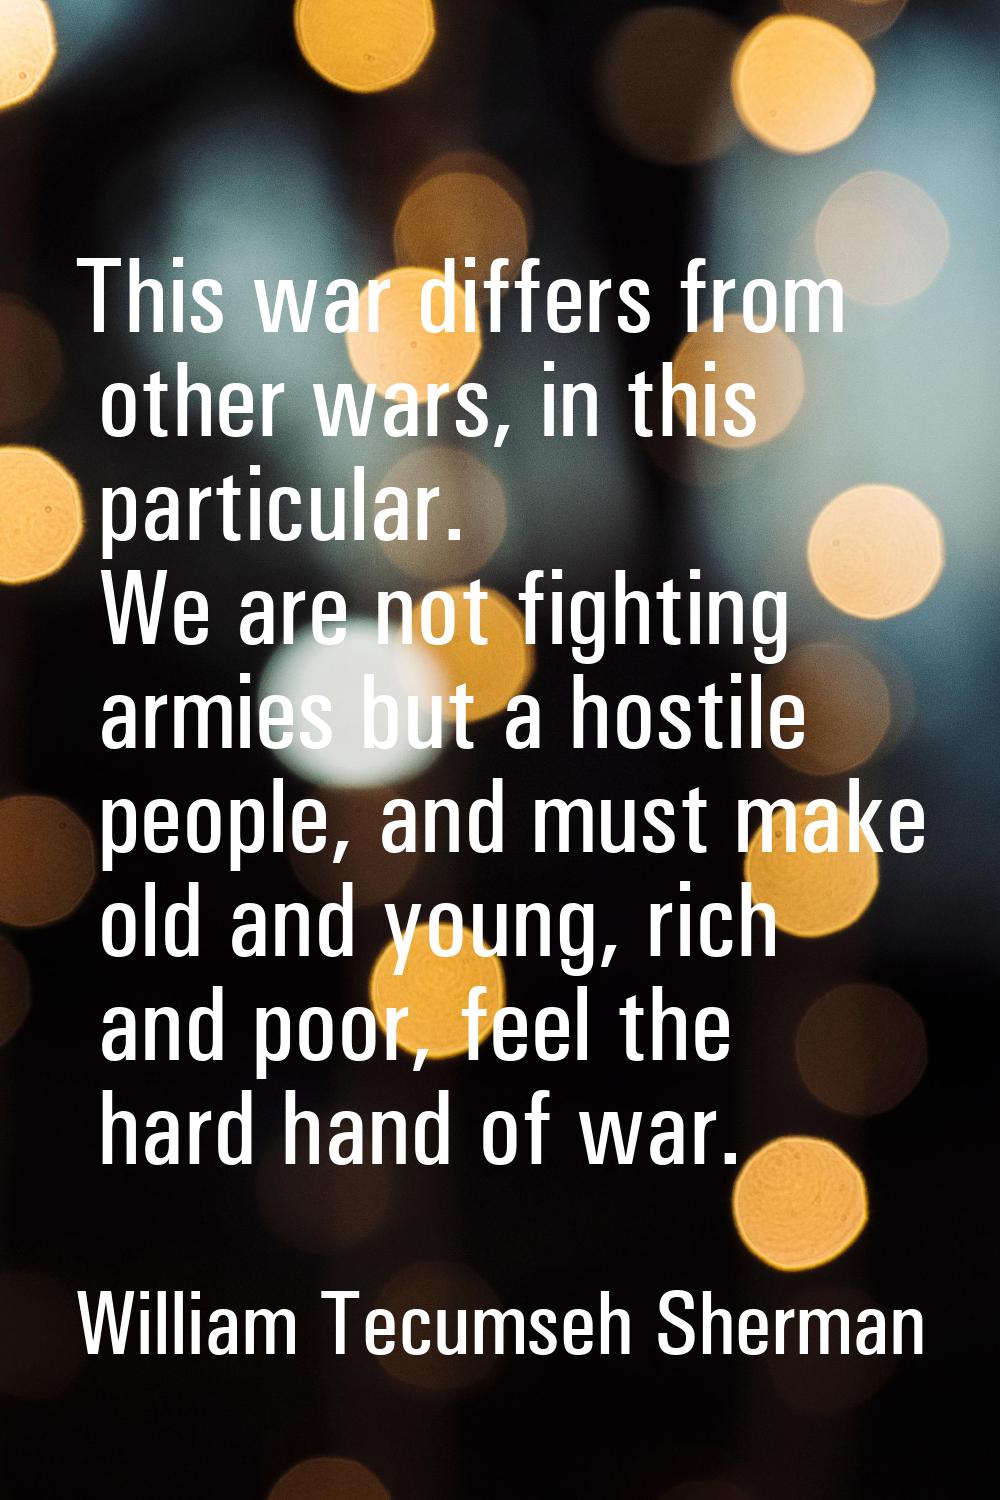 This war differs from other wars, in this particular. We are not fighting armies but a hostile peop